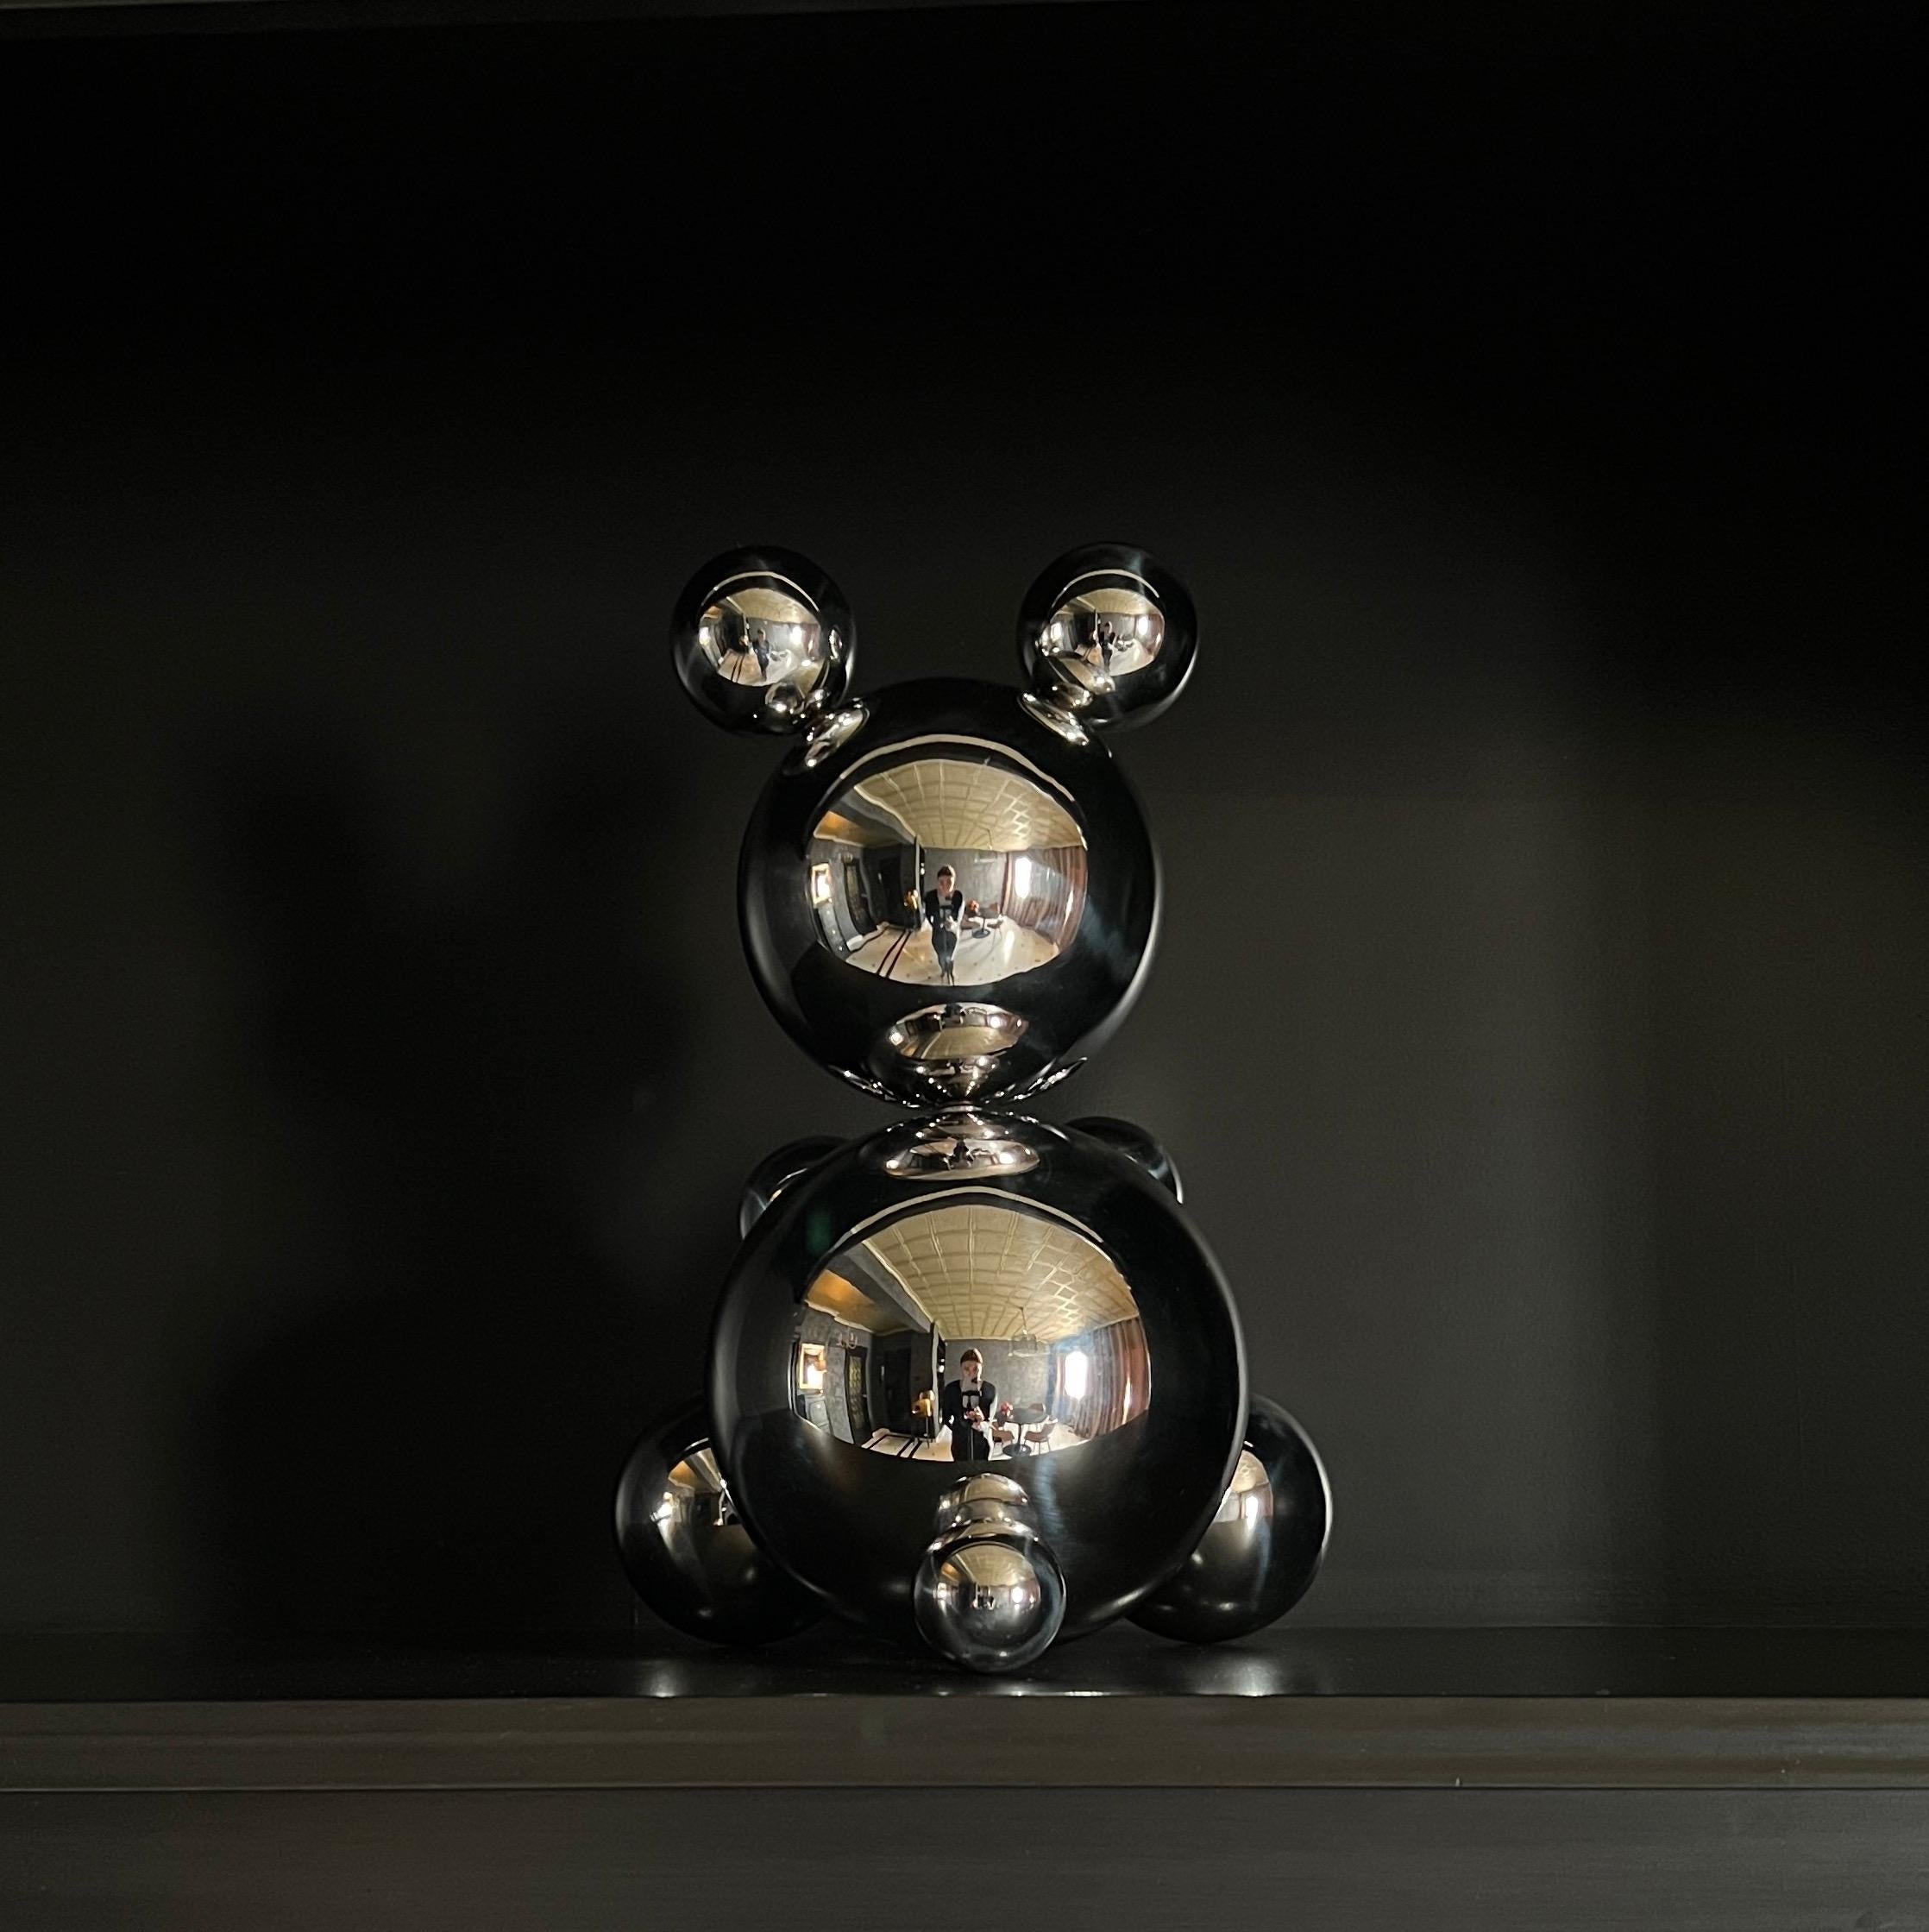 Middle Stainless Steel Bear 'Lucky' Sculpture Minimalistic Animal 6